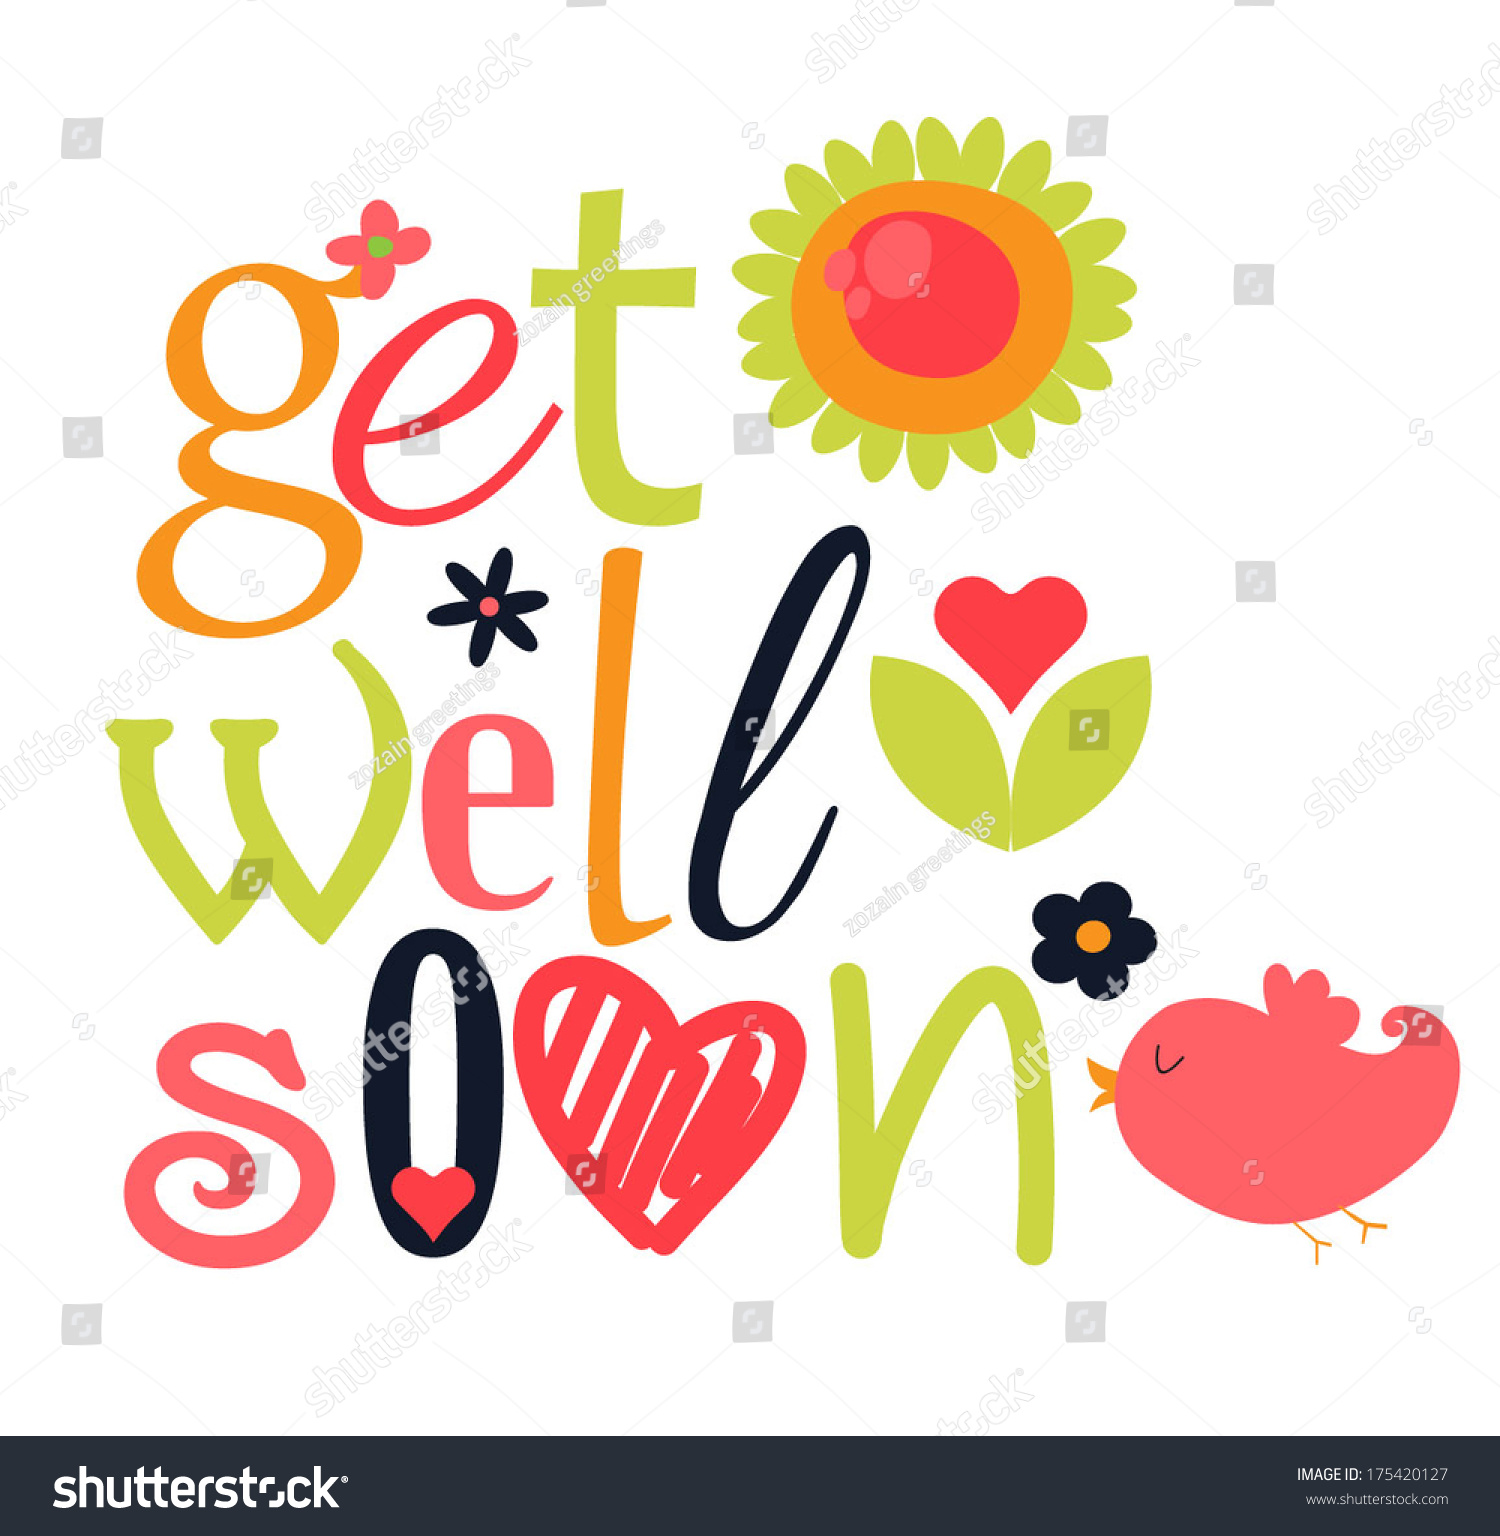 clip art get well wishes - photo #40